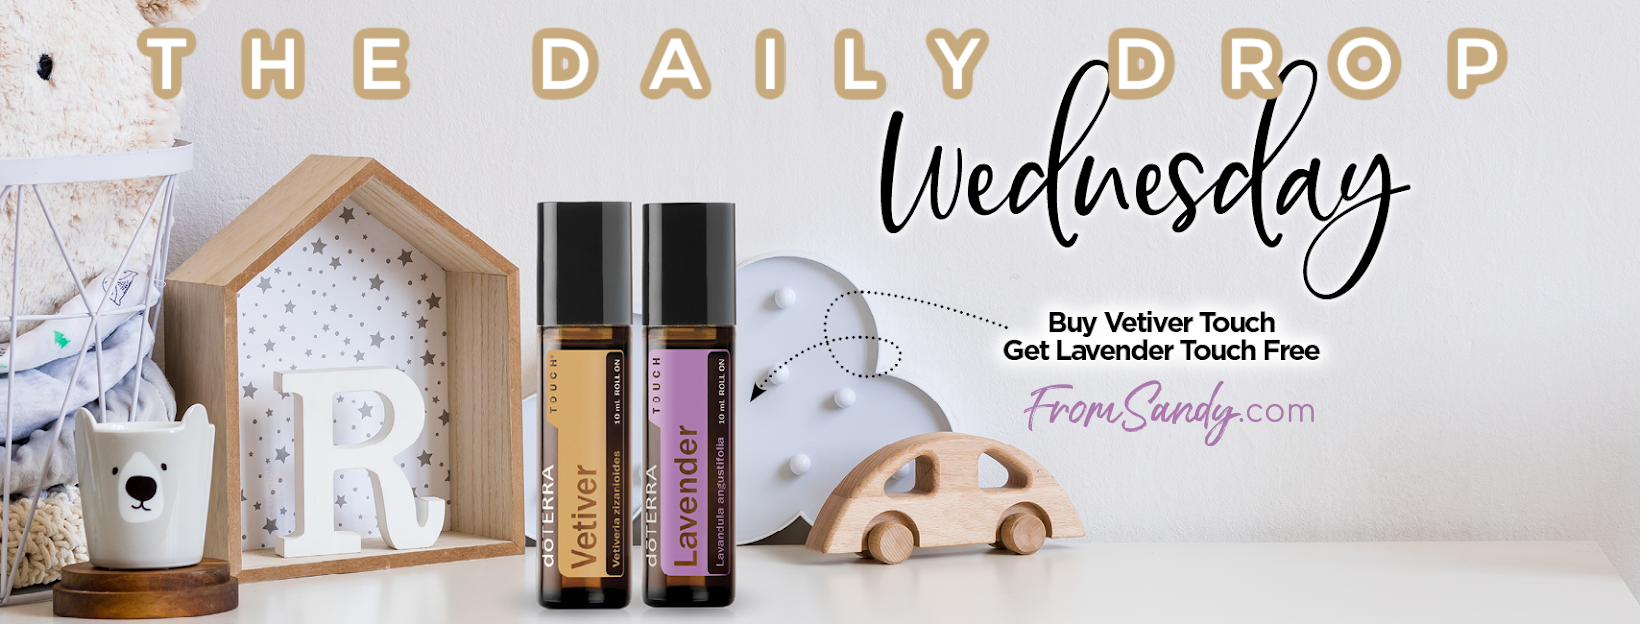 REST: Buy Vetiver Touch, Get Lavender Touch Free (3/22/23 ONLY) | From Sandy